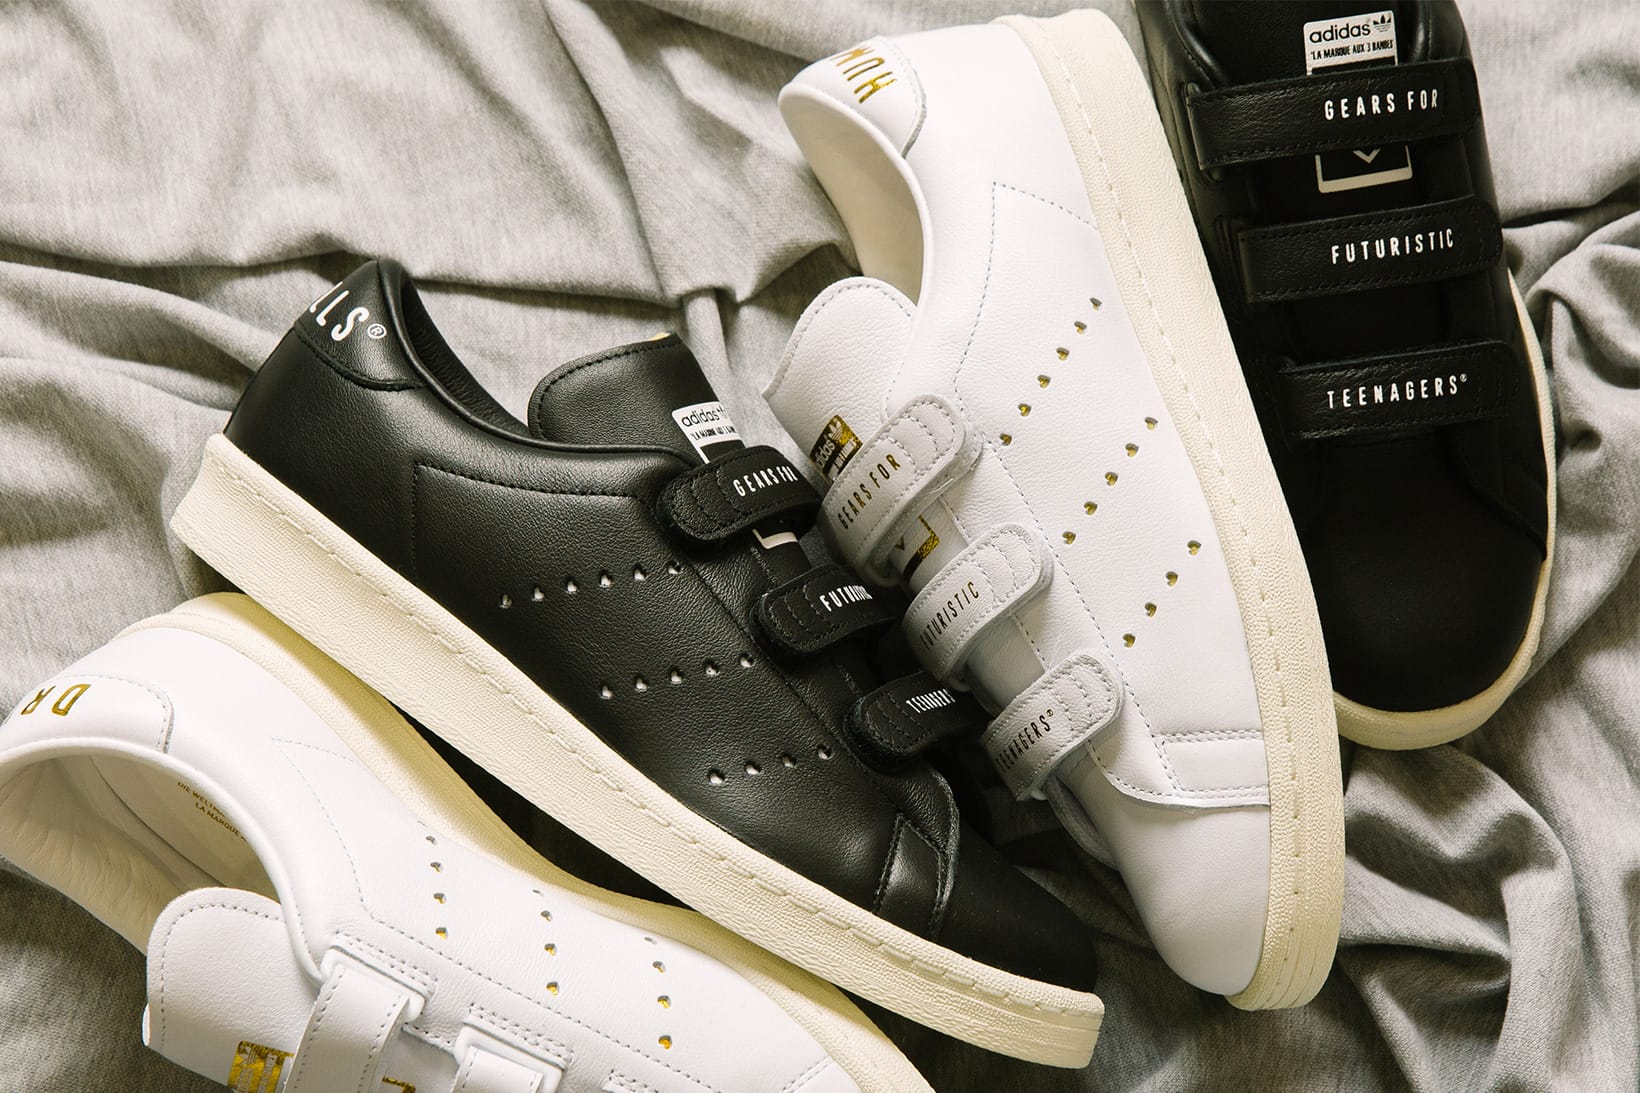 adidas trainers with velcro straps